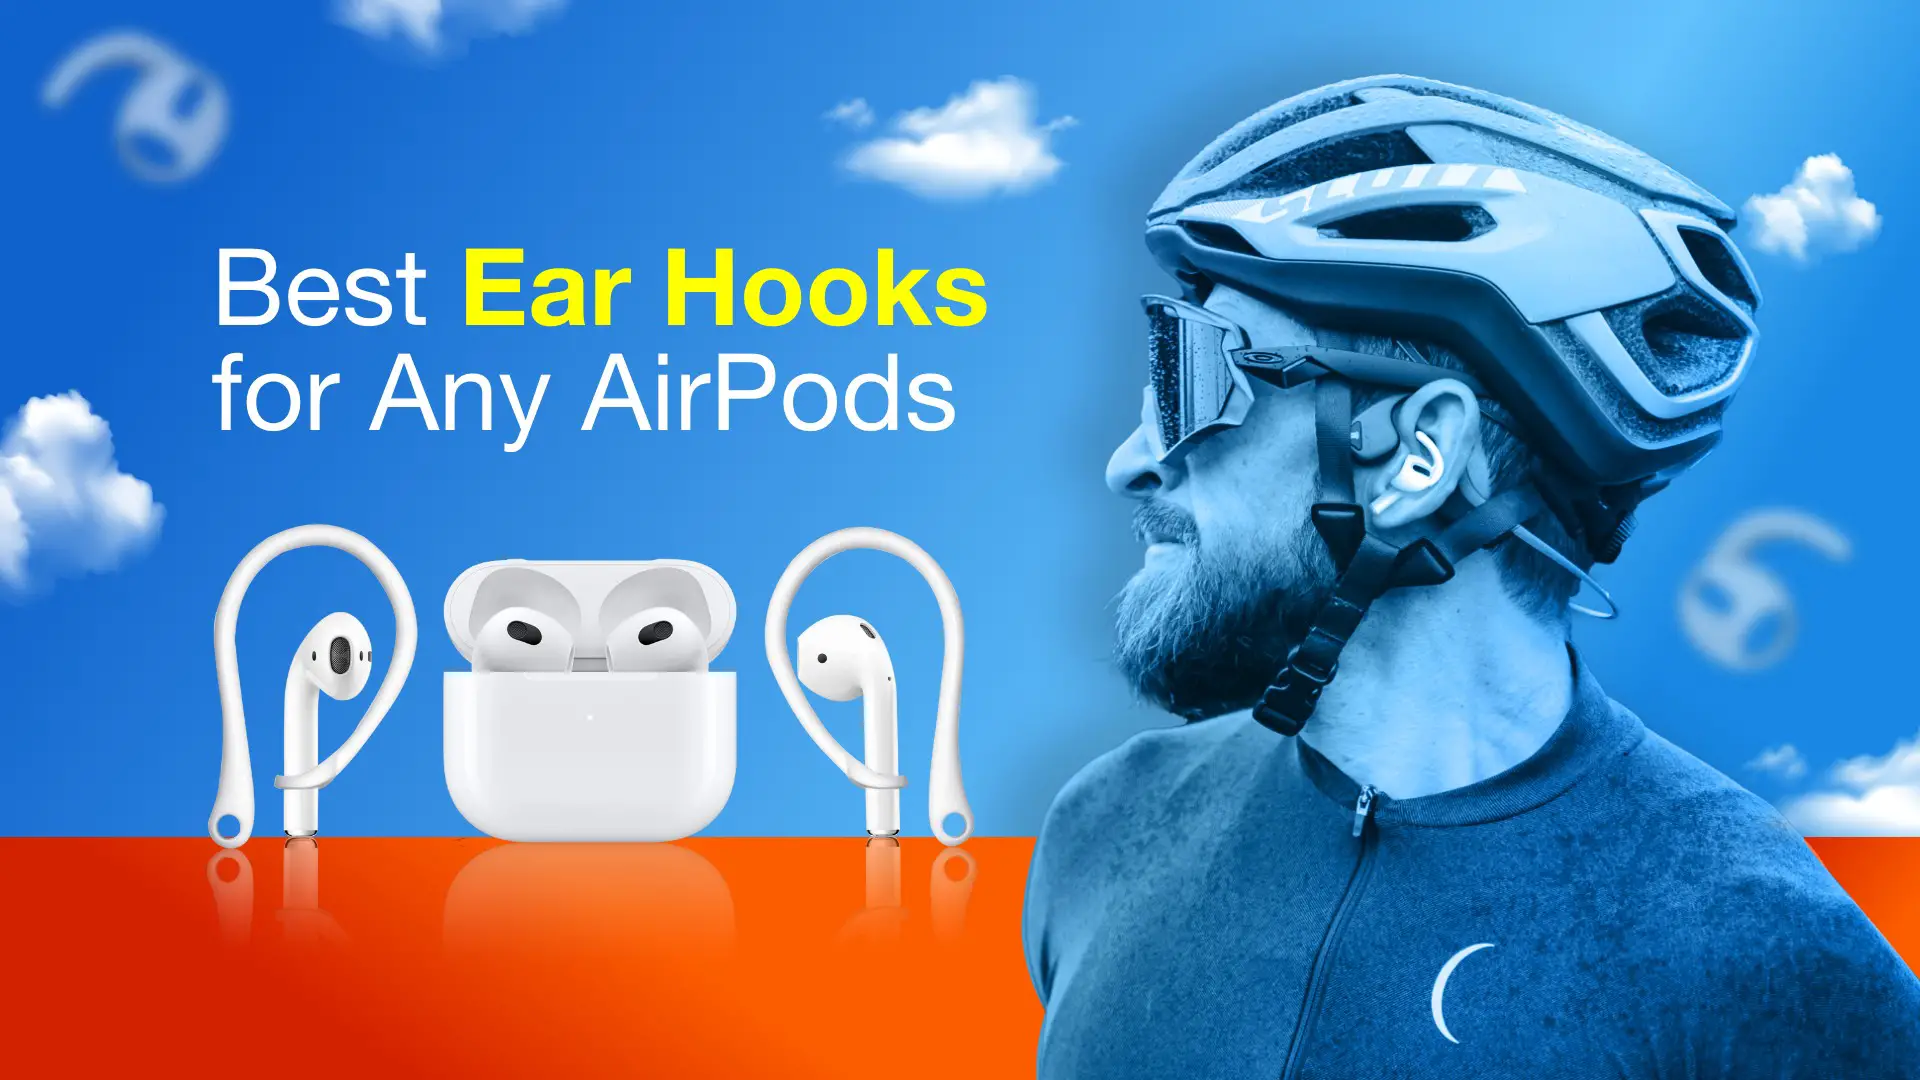 Best Ear Hooks for any AirPods